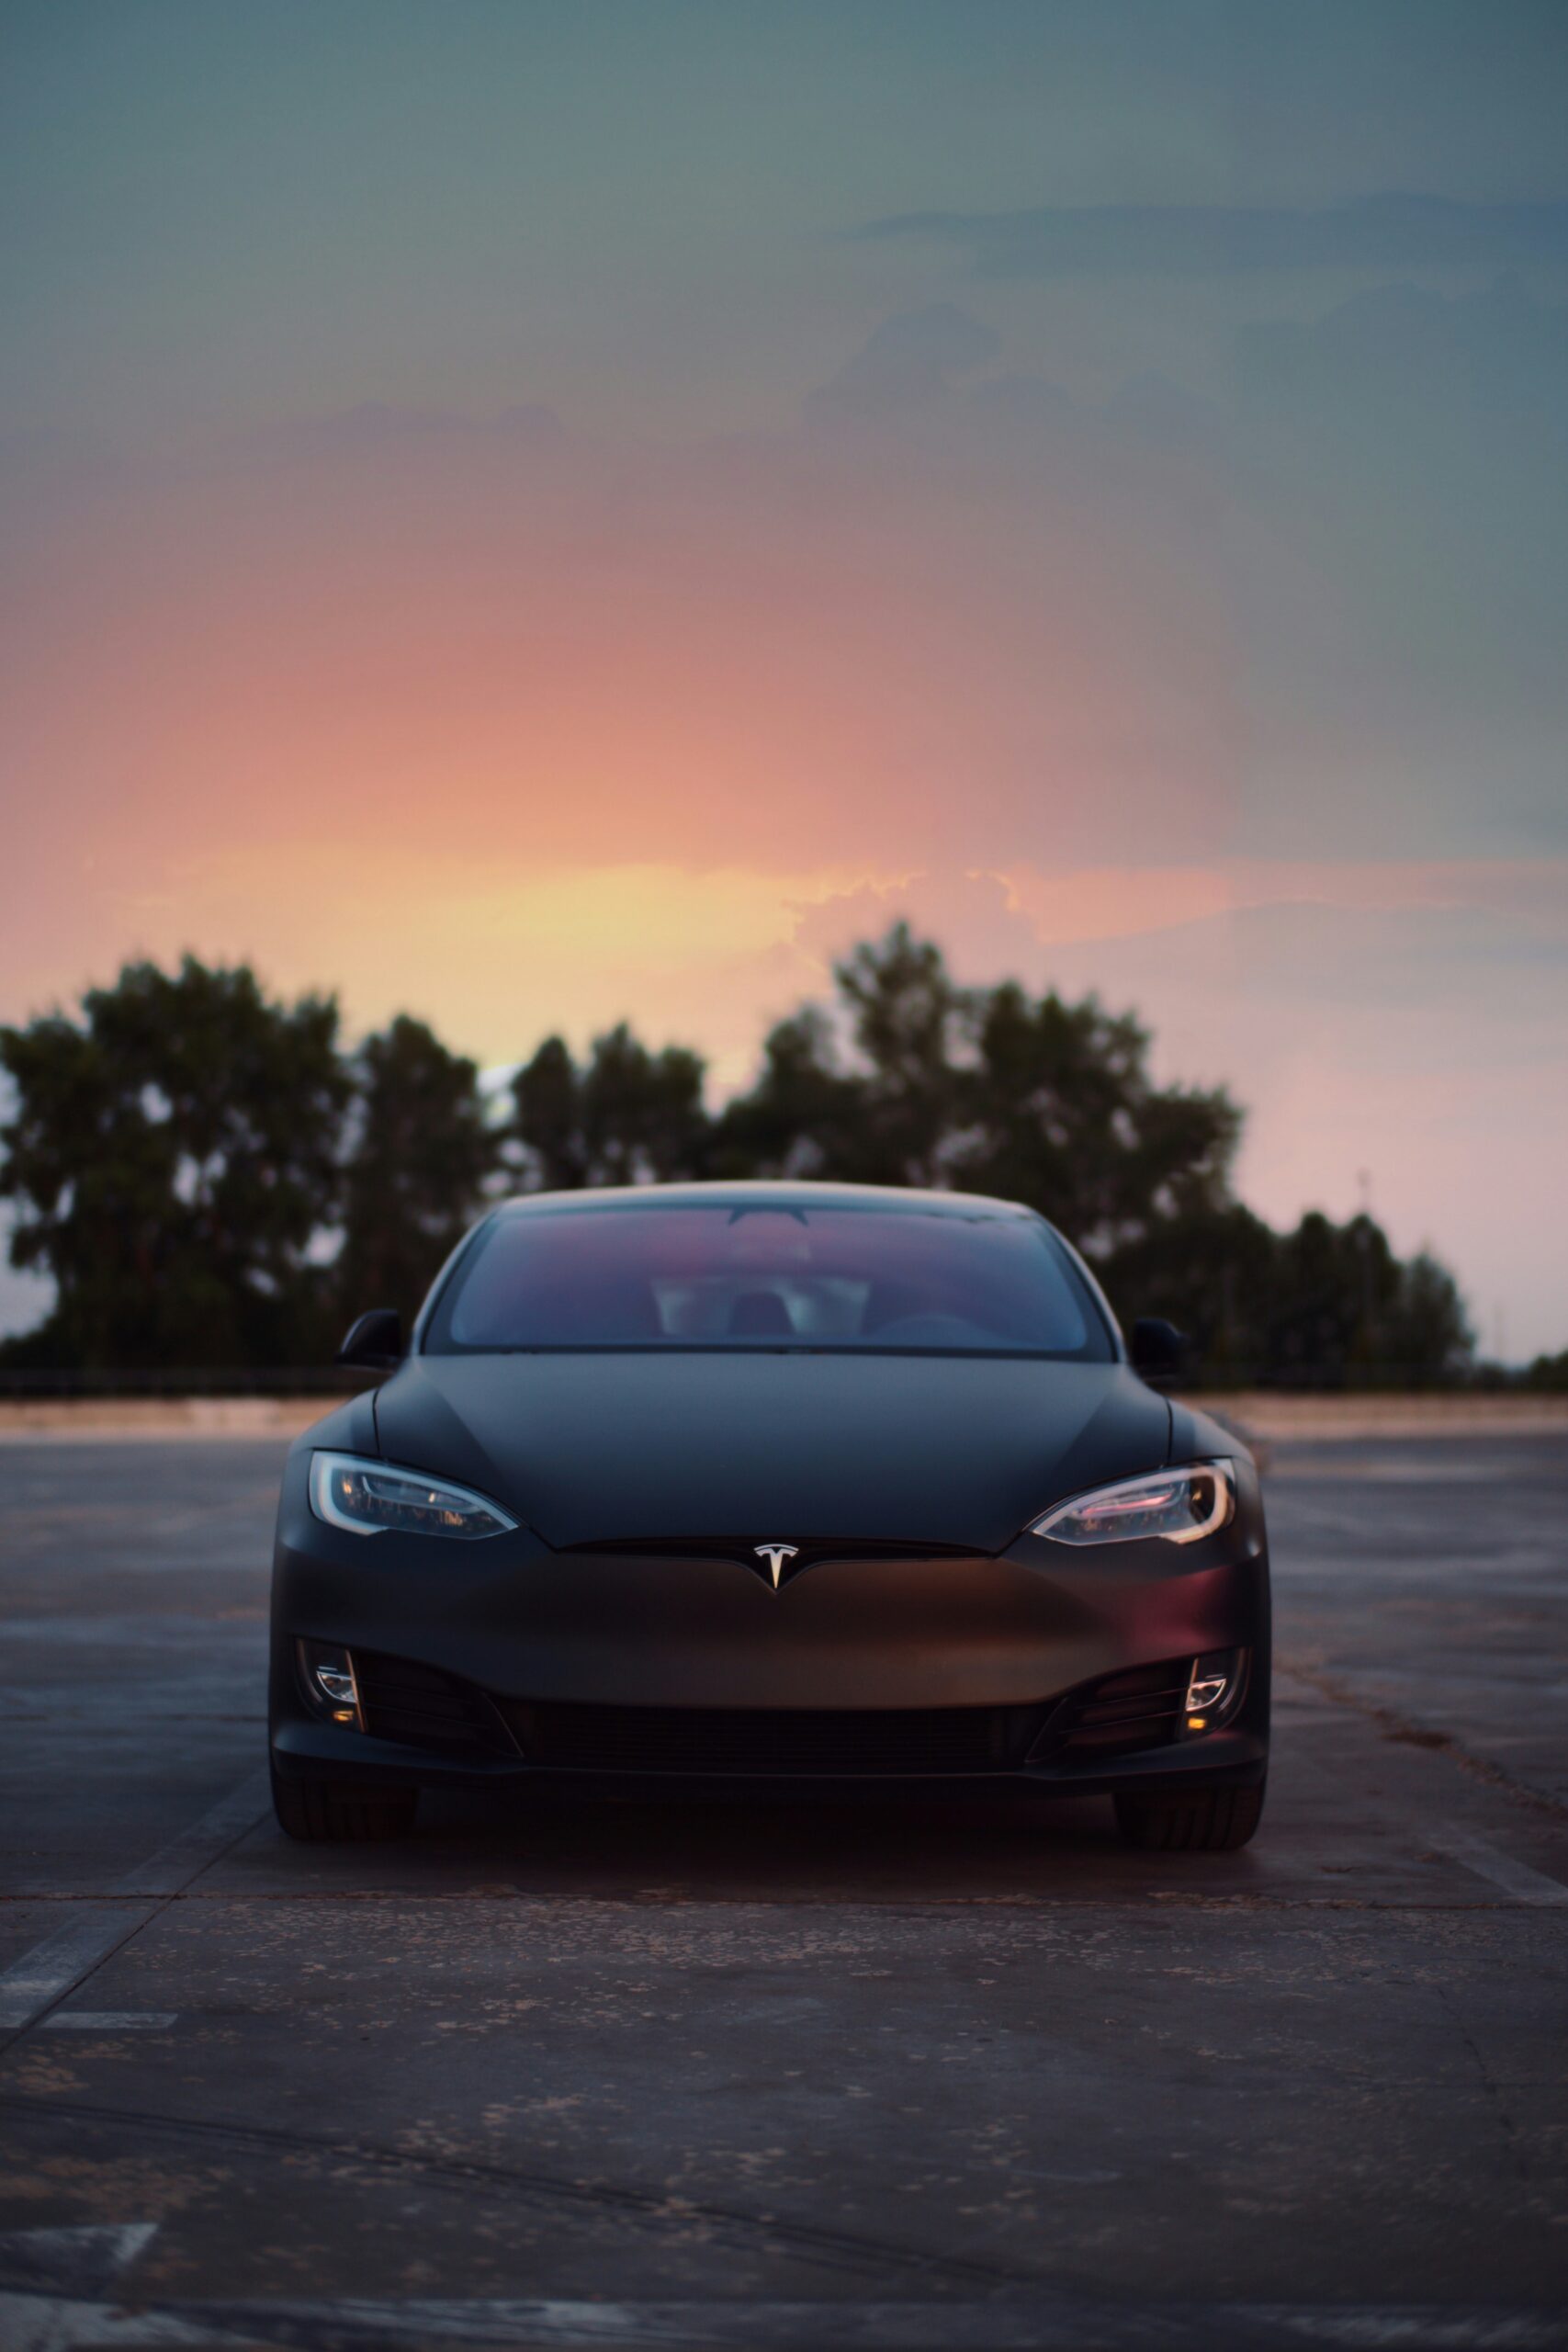 You are currently viewing The Tesla Model 3, Model S, Model X, and Model Y: A Closer Look at Tesla’s Electric Vehicle Lineup